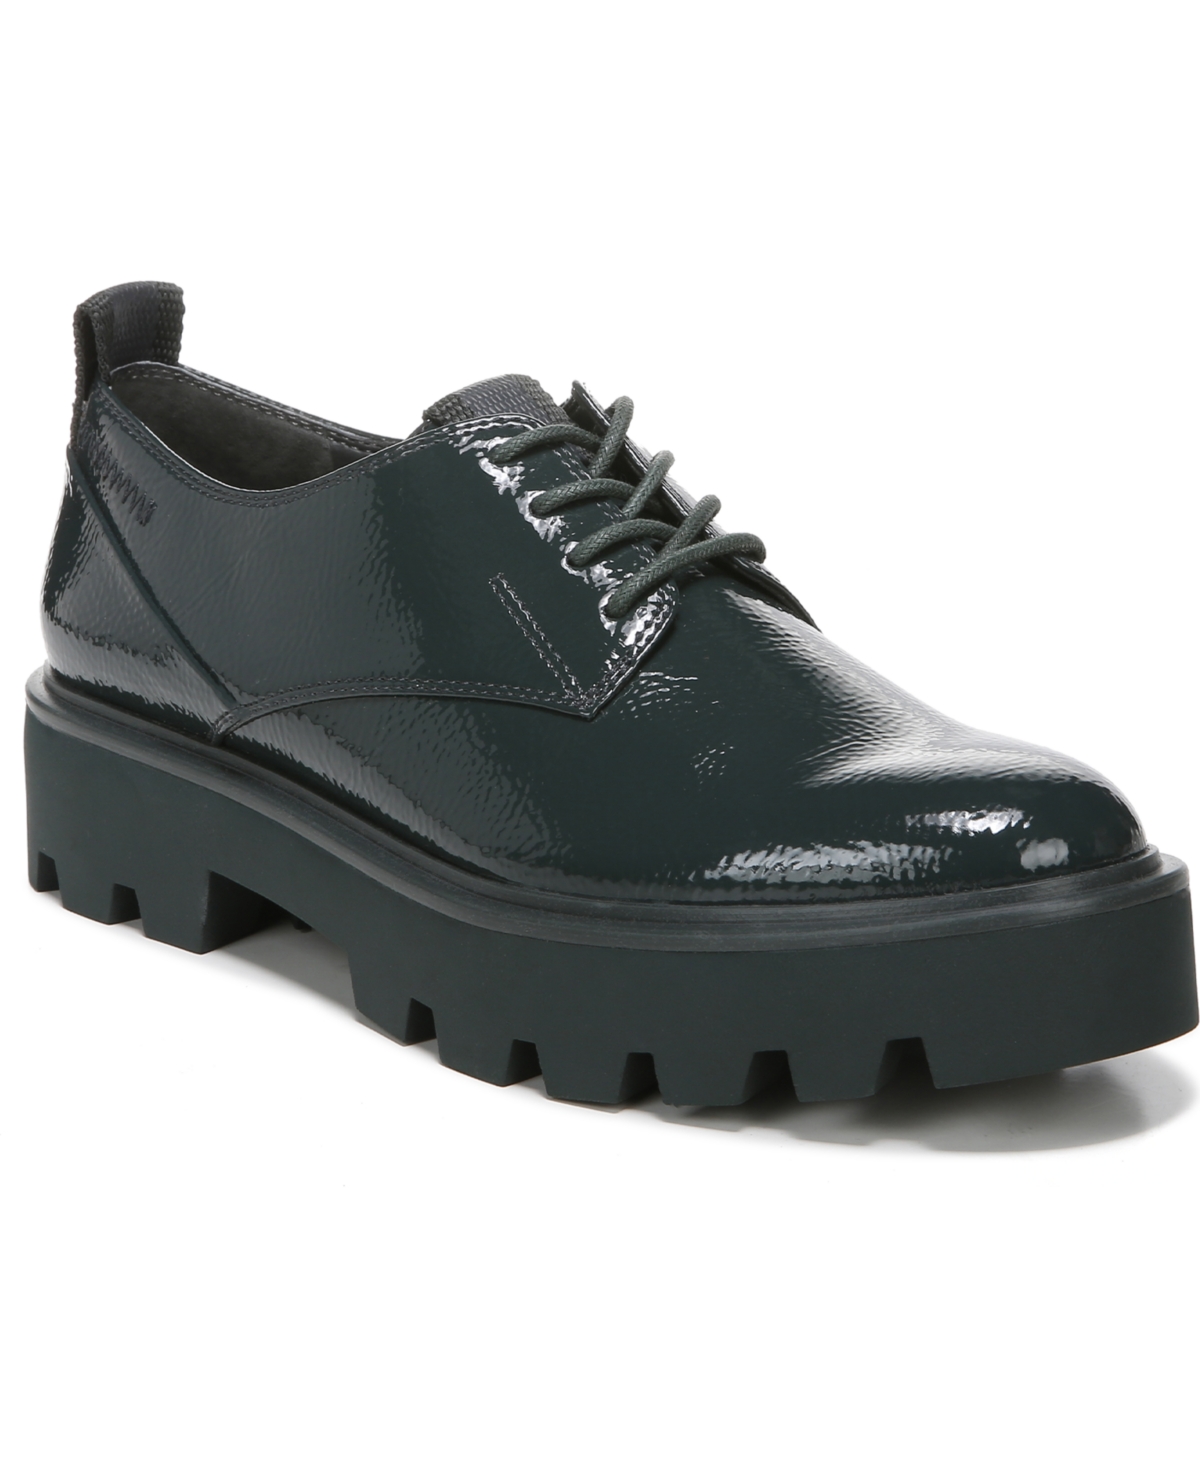 UPC 017138587525 product image for Franco Sarto Balin Laced Lug Sole Oxfords Women's Shoes | upcitemdb.com